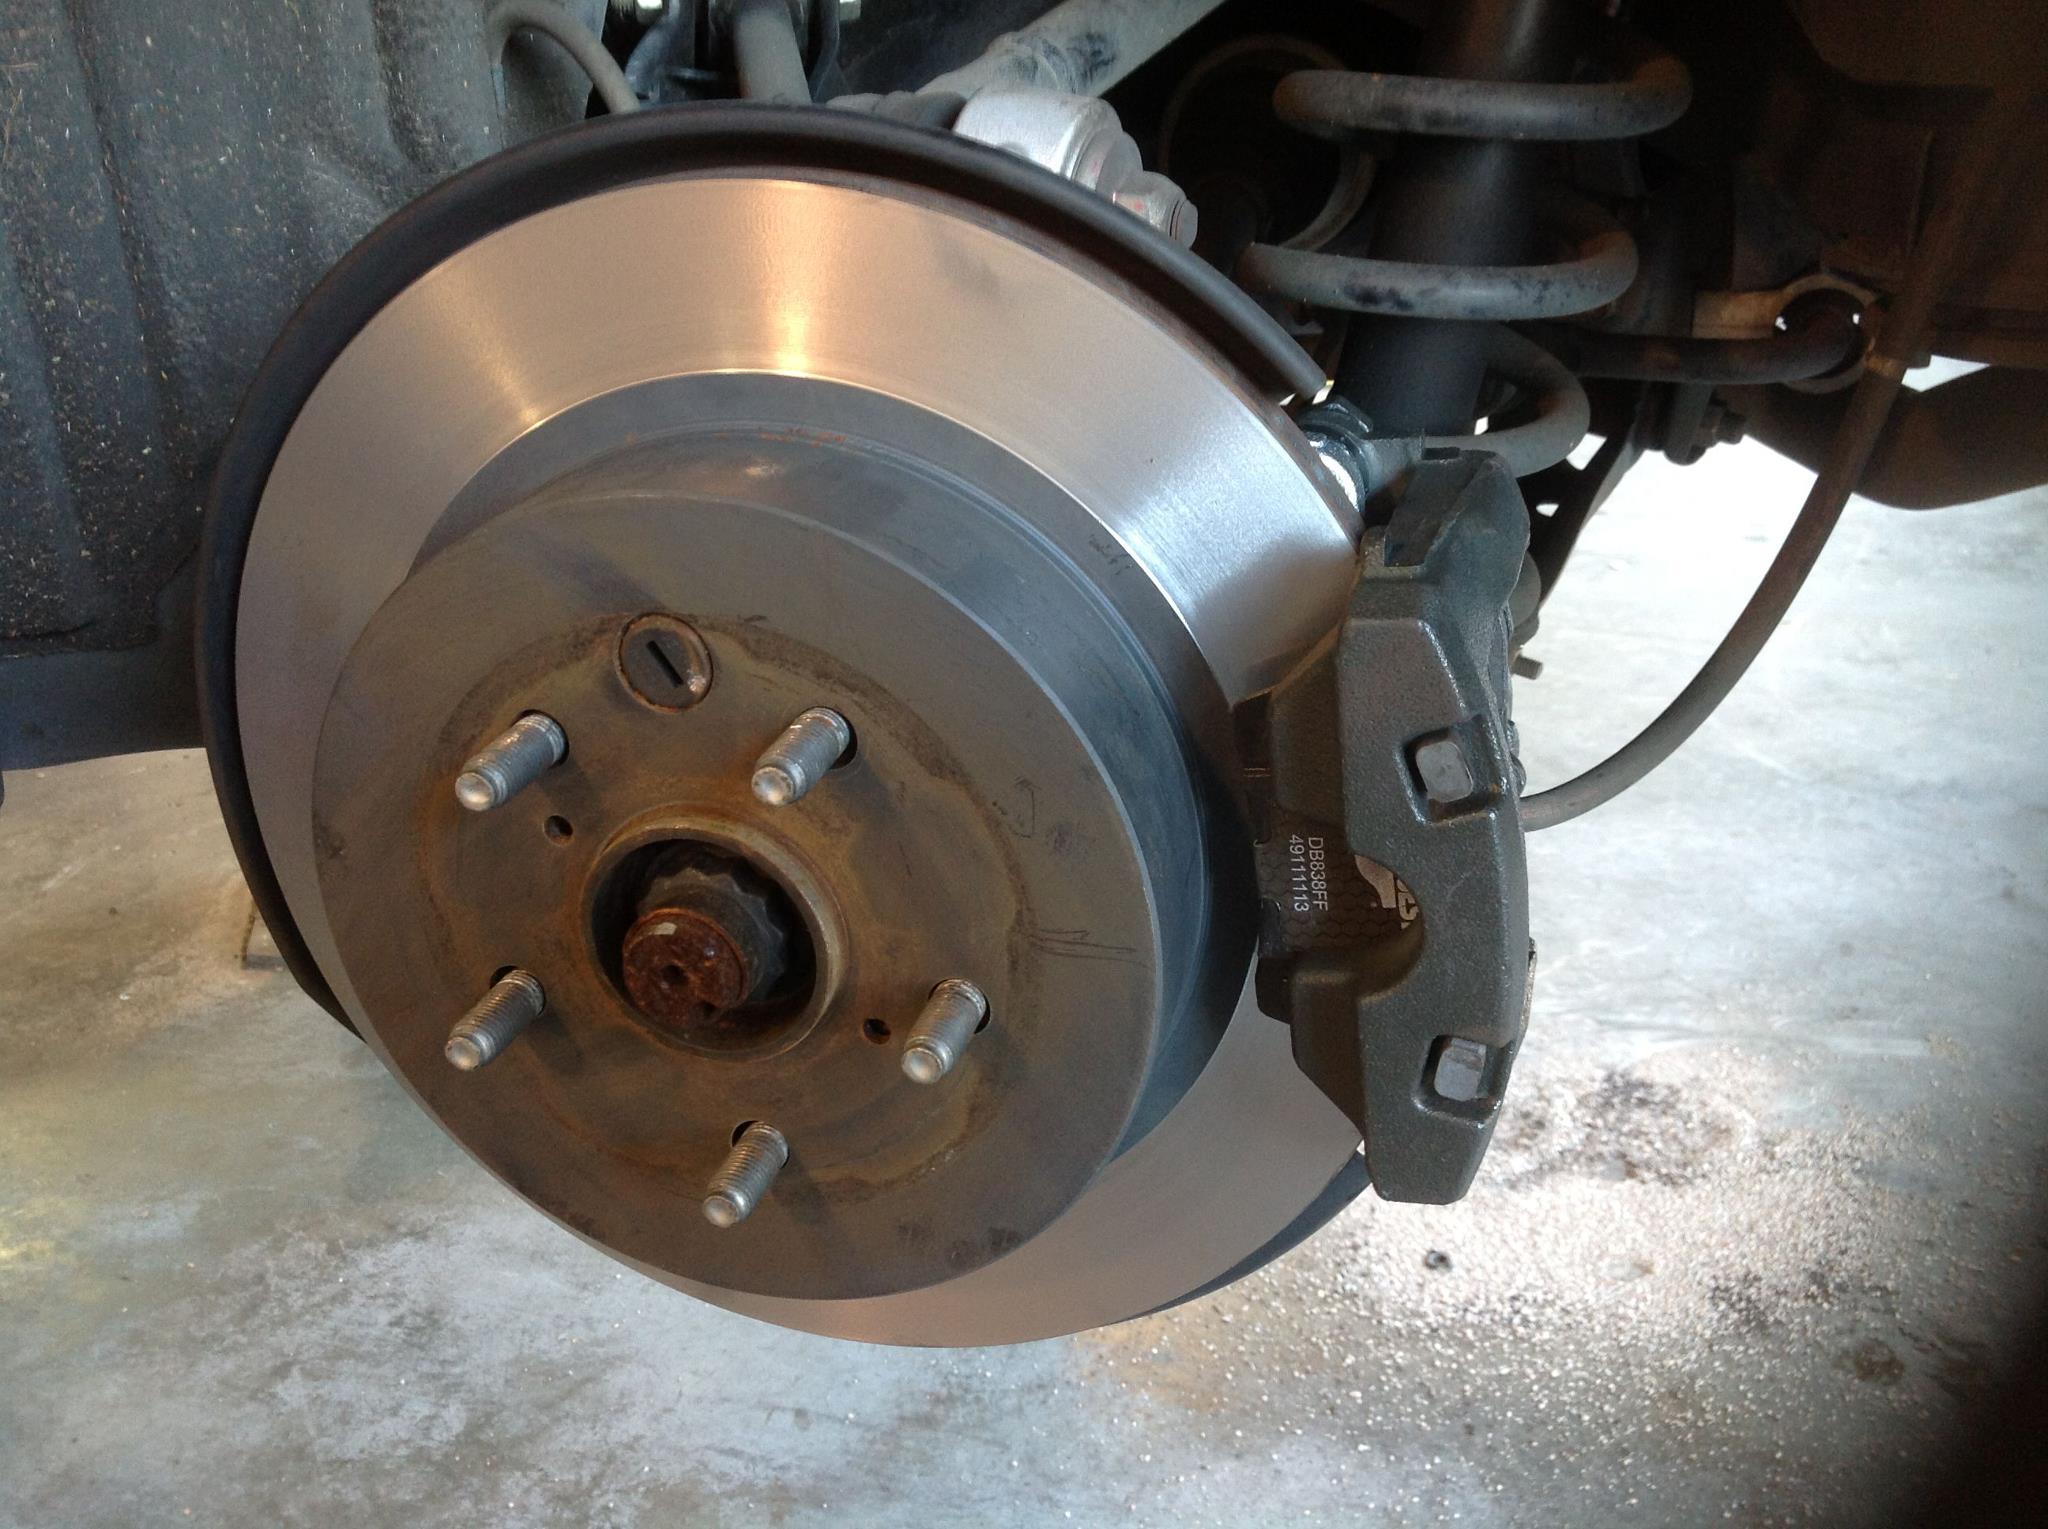 When is the last time you had your brakes checked